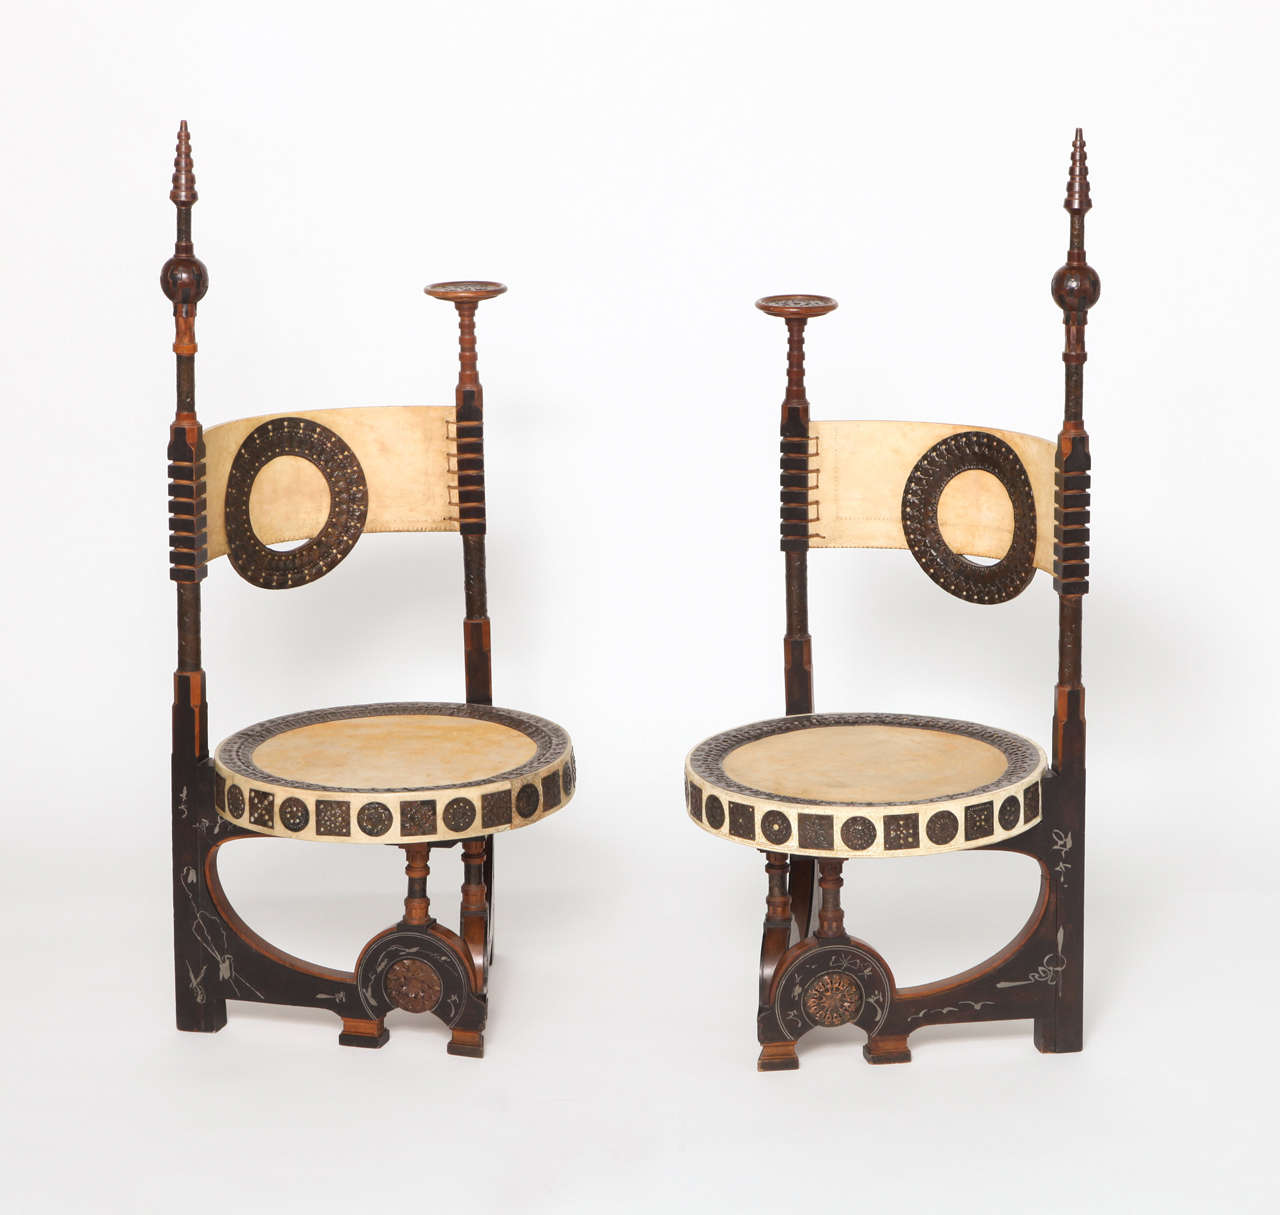 An Opposing pair of Carlo Bugatti Chairs, Wood, Pewter,Copper
and Parchment, one chair signed Bugatti, Milano, c.1898. The Chairs are in Mint condition.